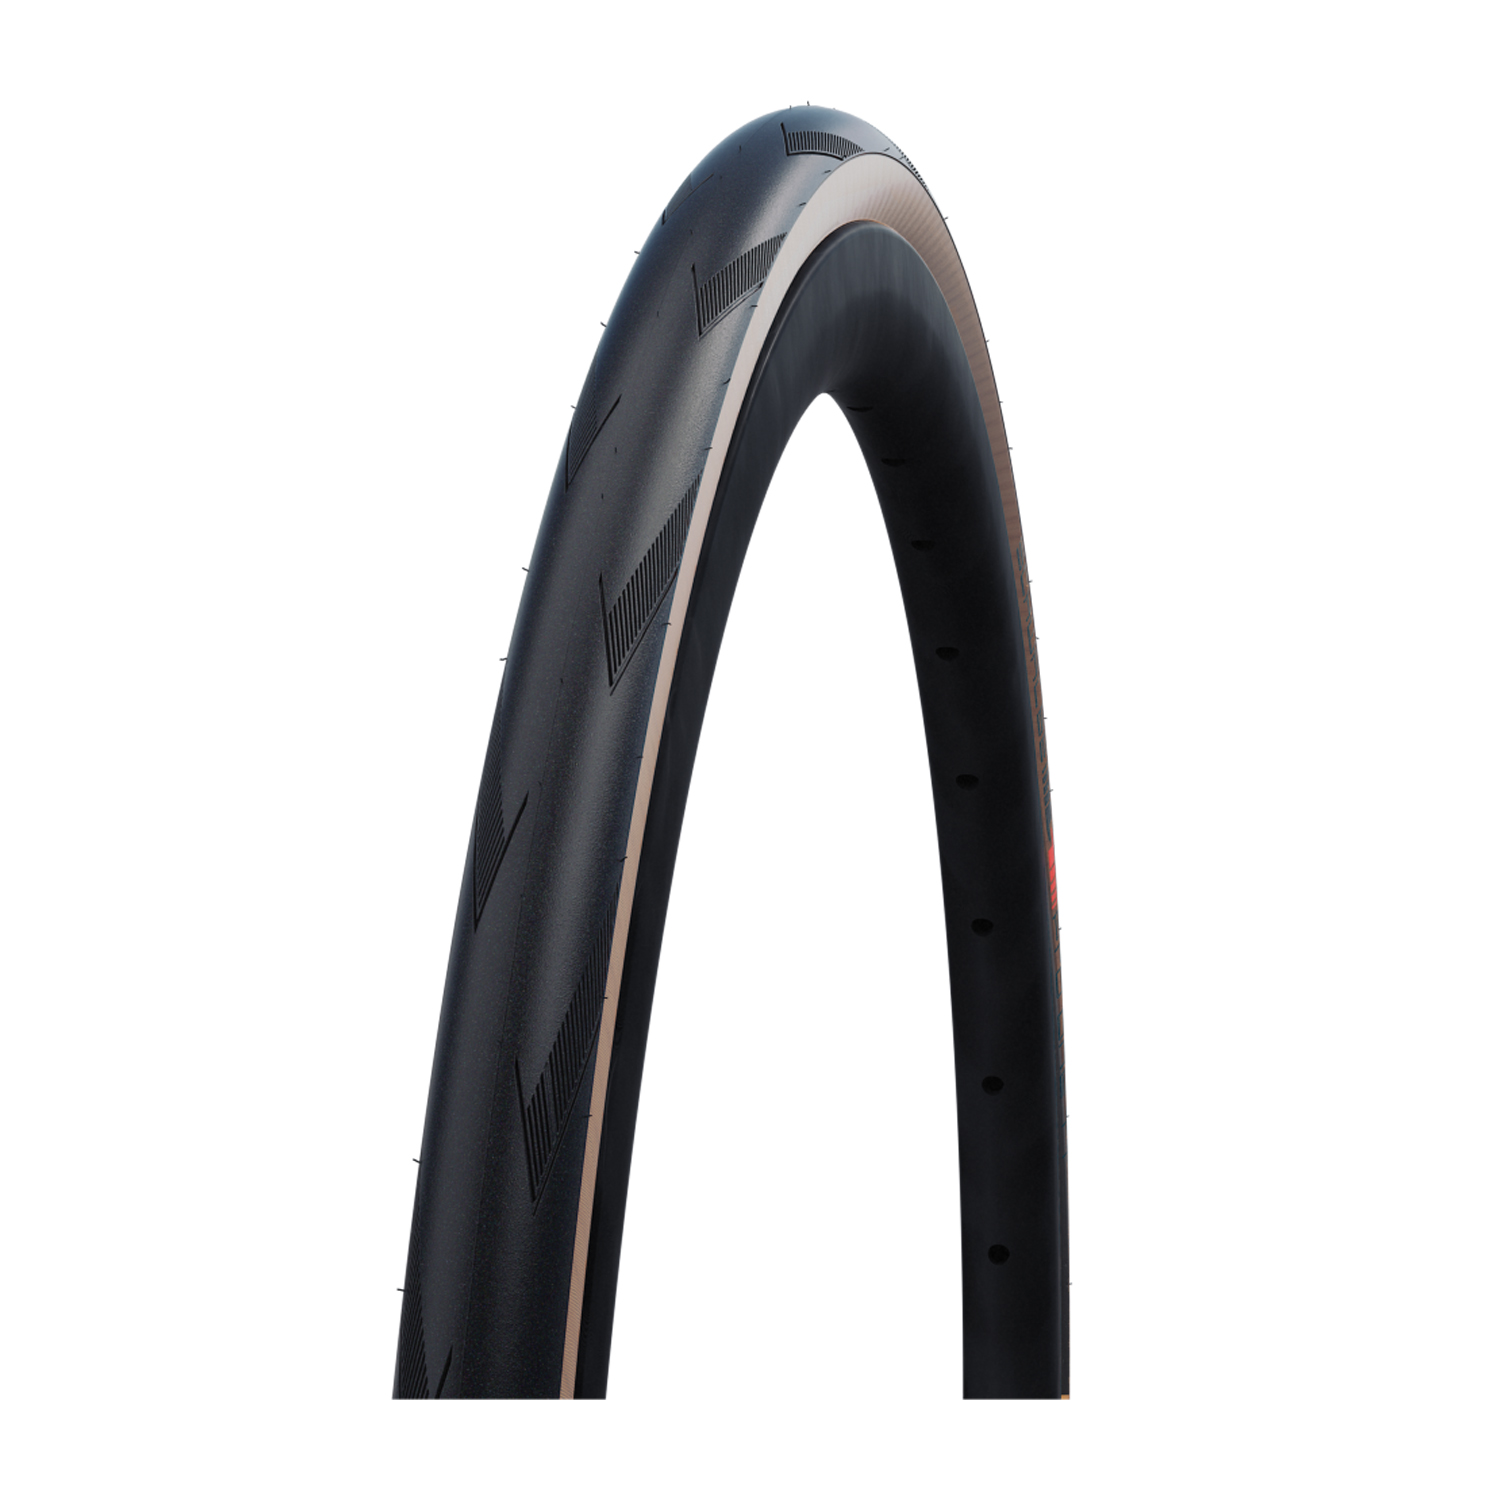 Schwalbe pro one TLE racefiets band